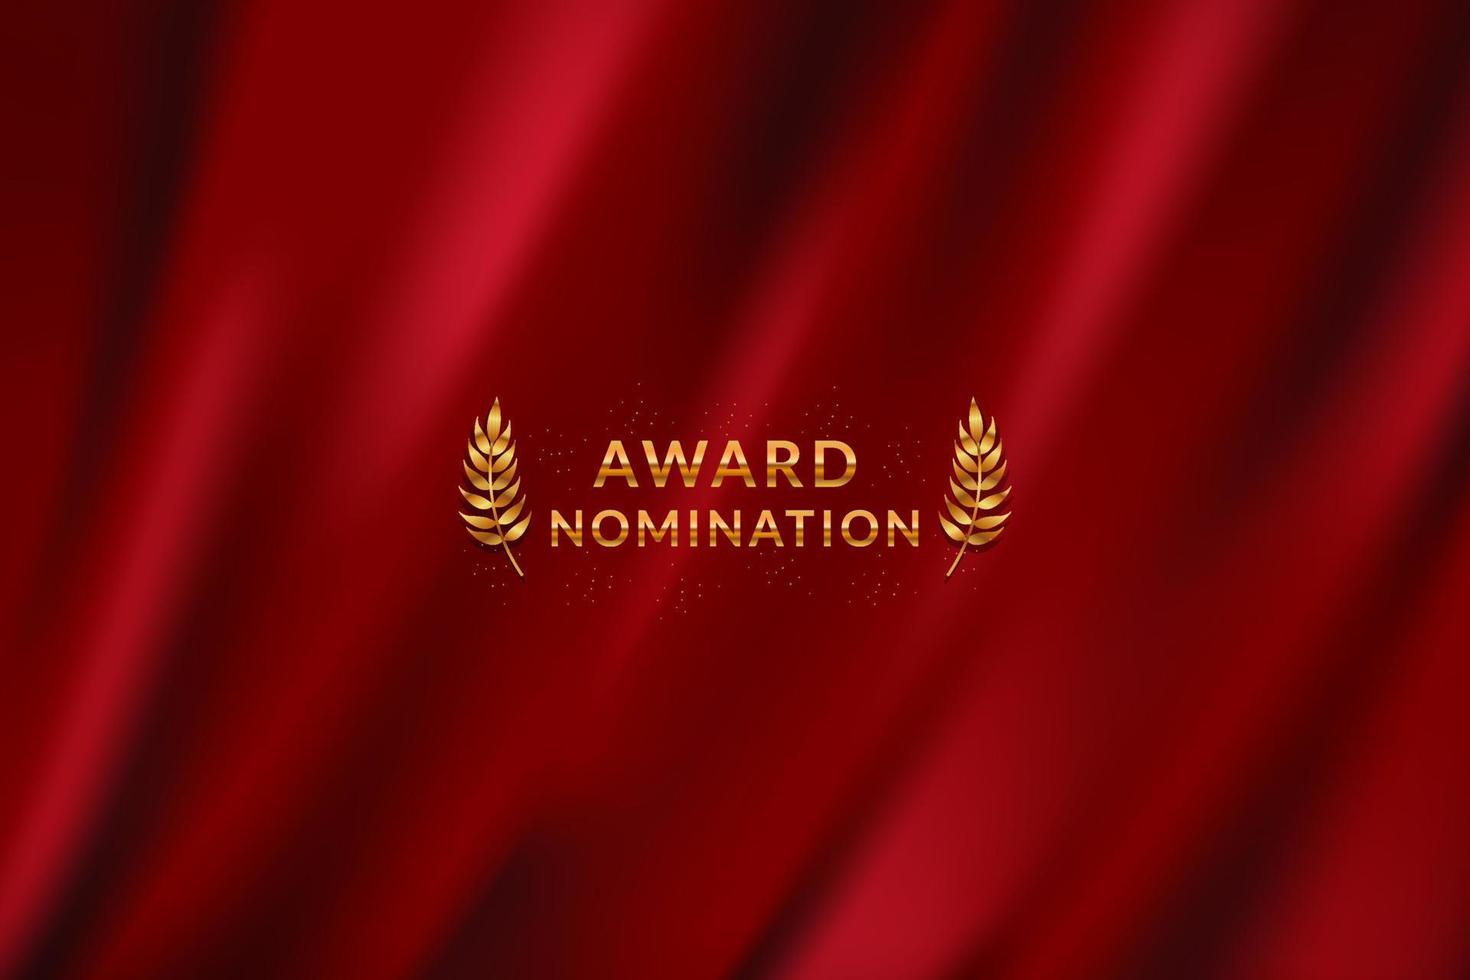 Award nomination ceremony luxury background with red curtain cloth drape with golden wreath leaves vector